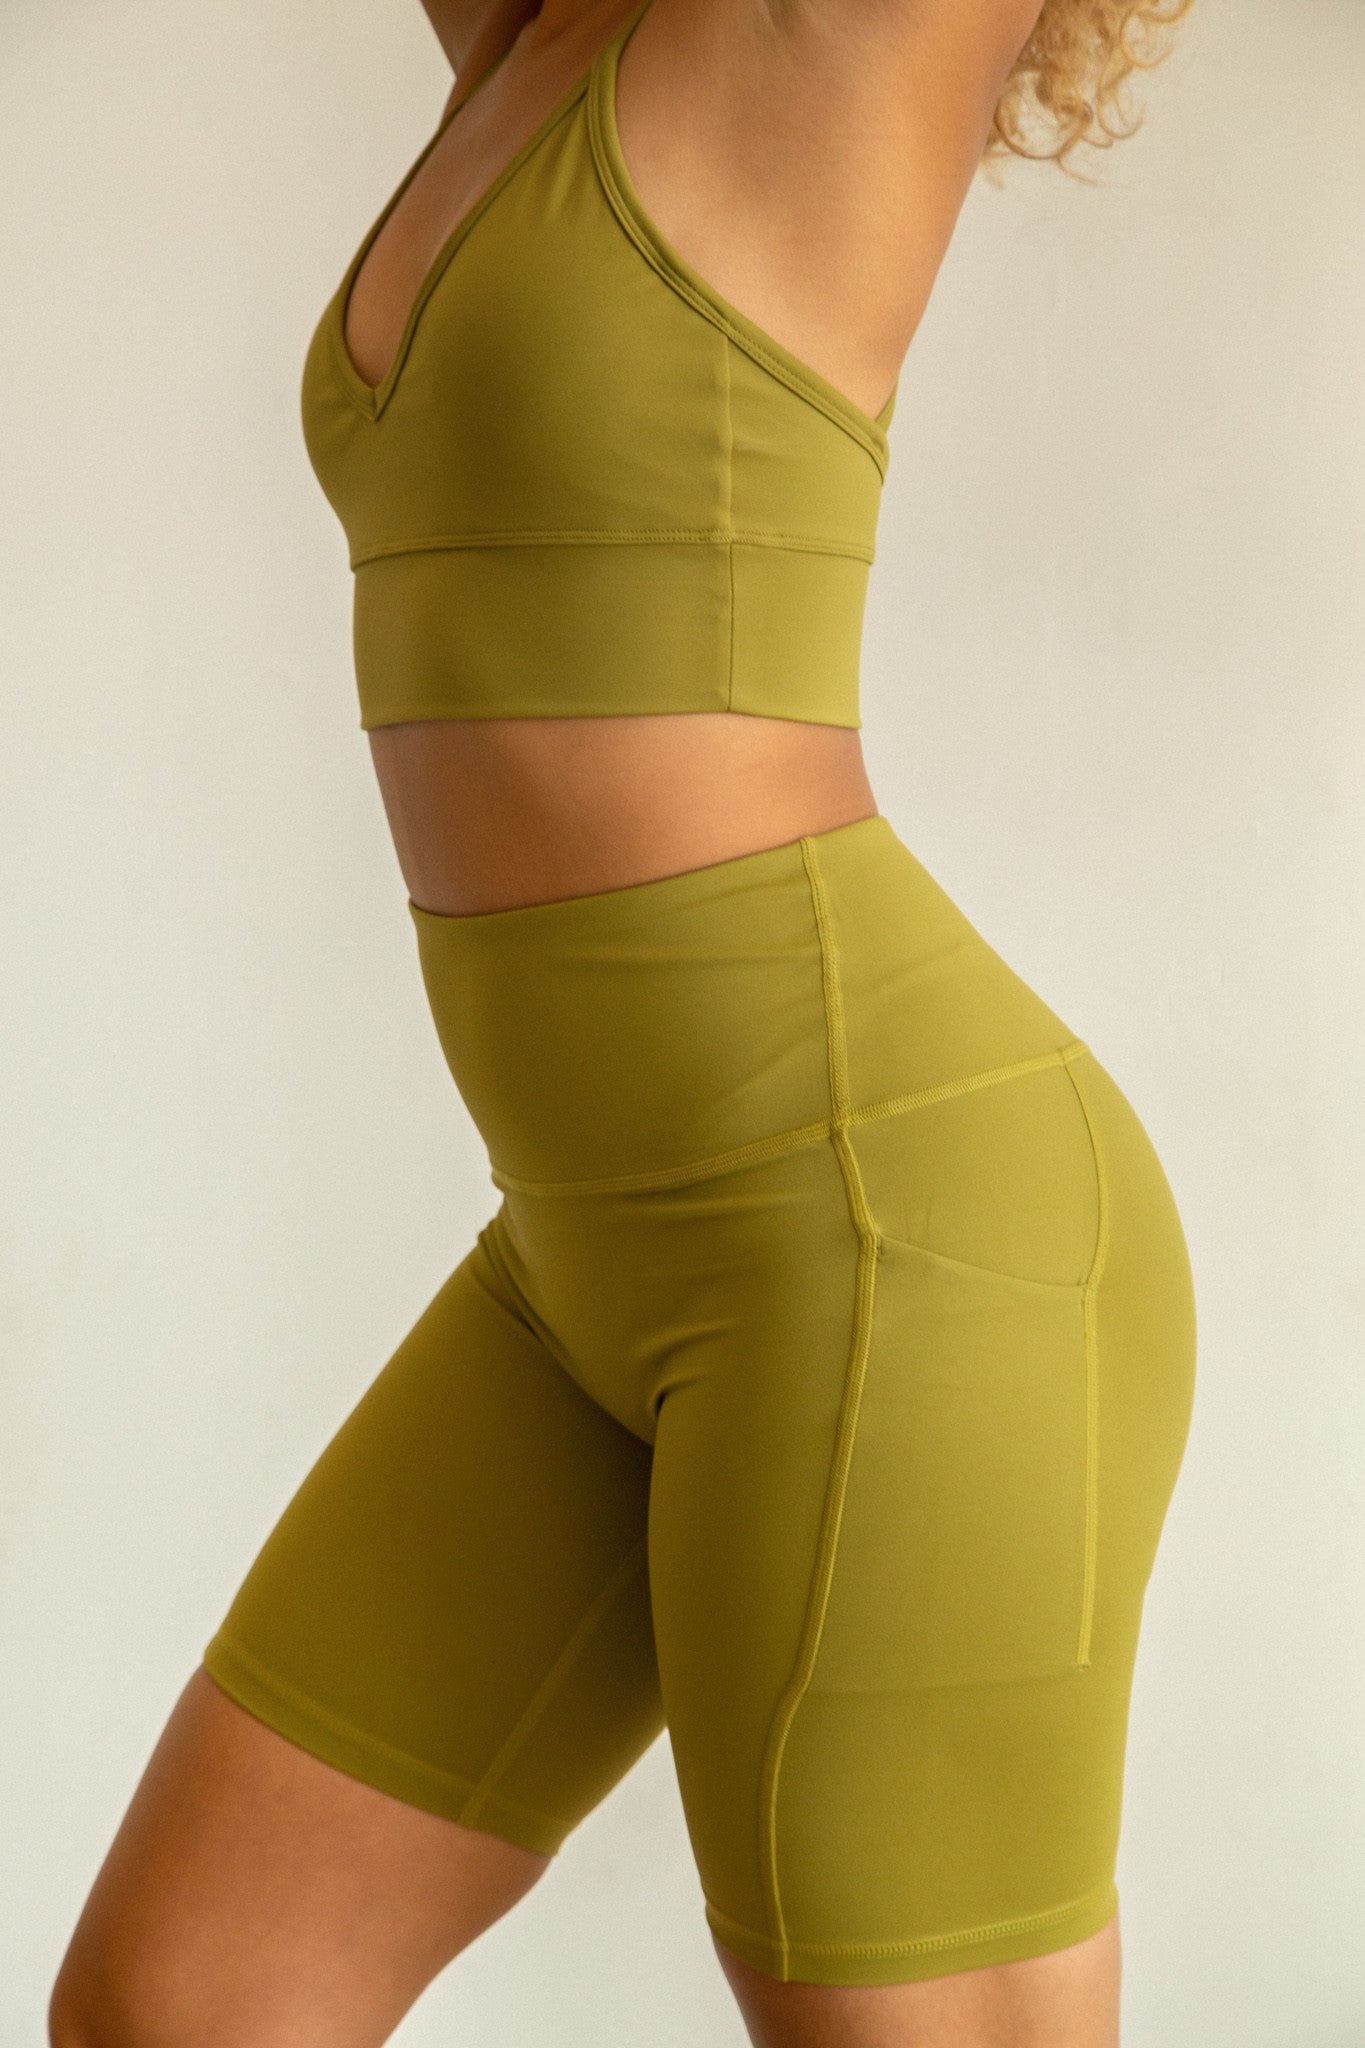 Elevate your casual look with the Willow Activewear Set. Whether you're hitting the gym or running errands, this set has got you covered (literally). Crafted from Lululemon fabric, you'll feel nothing but amazing in this buttery soft active set.